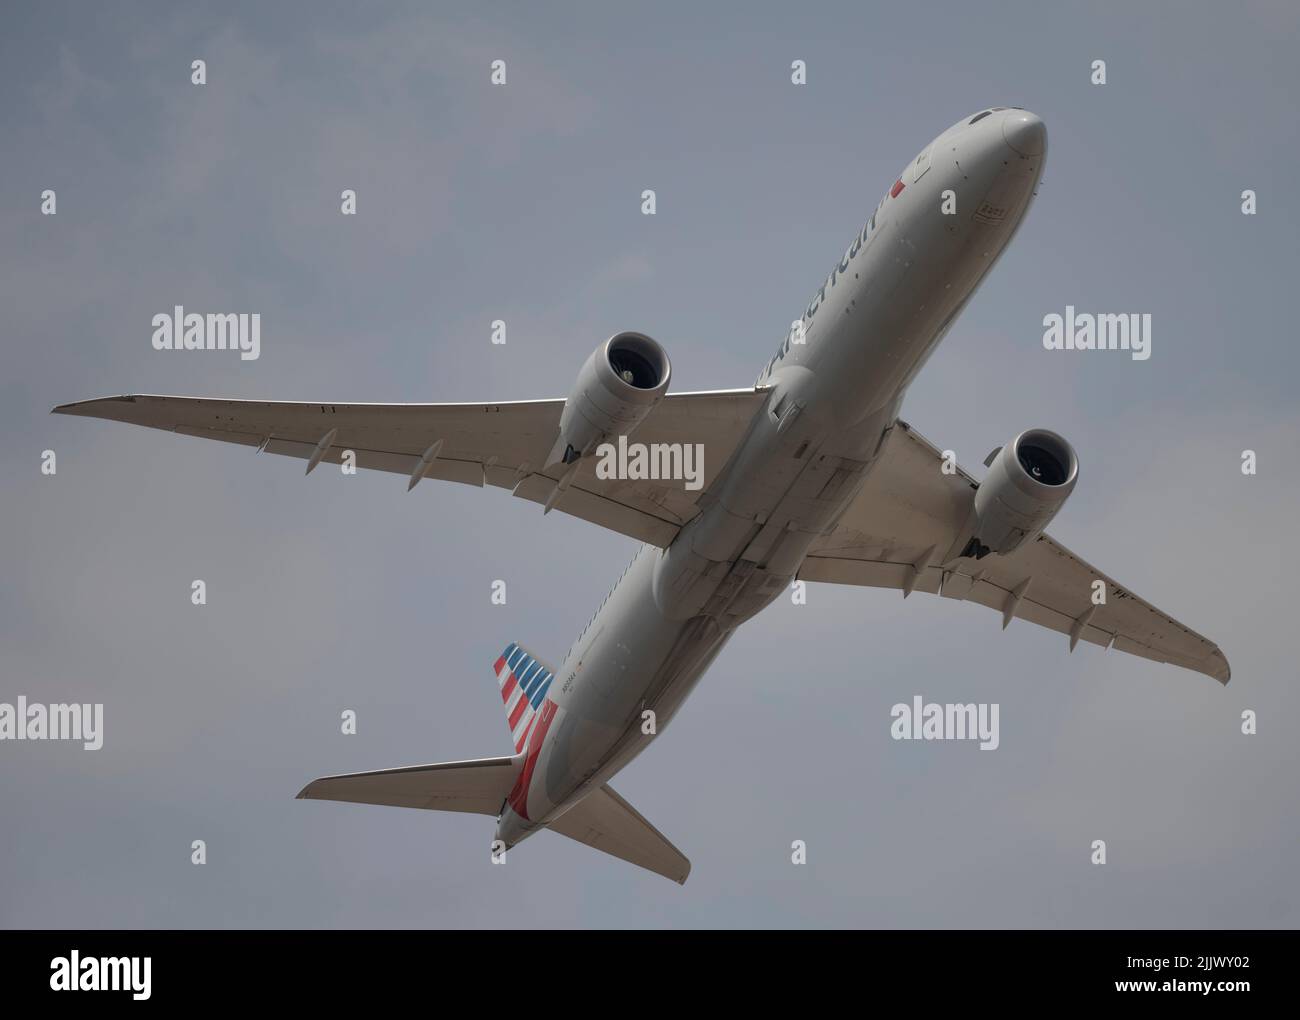 Heathrow Airport, London, UK. 28 July 2022. American Airlines Boeing 787 Dreamliner N833AA taking off from Southern runway at Heathrow on London to Chicago route Stock Photo